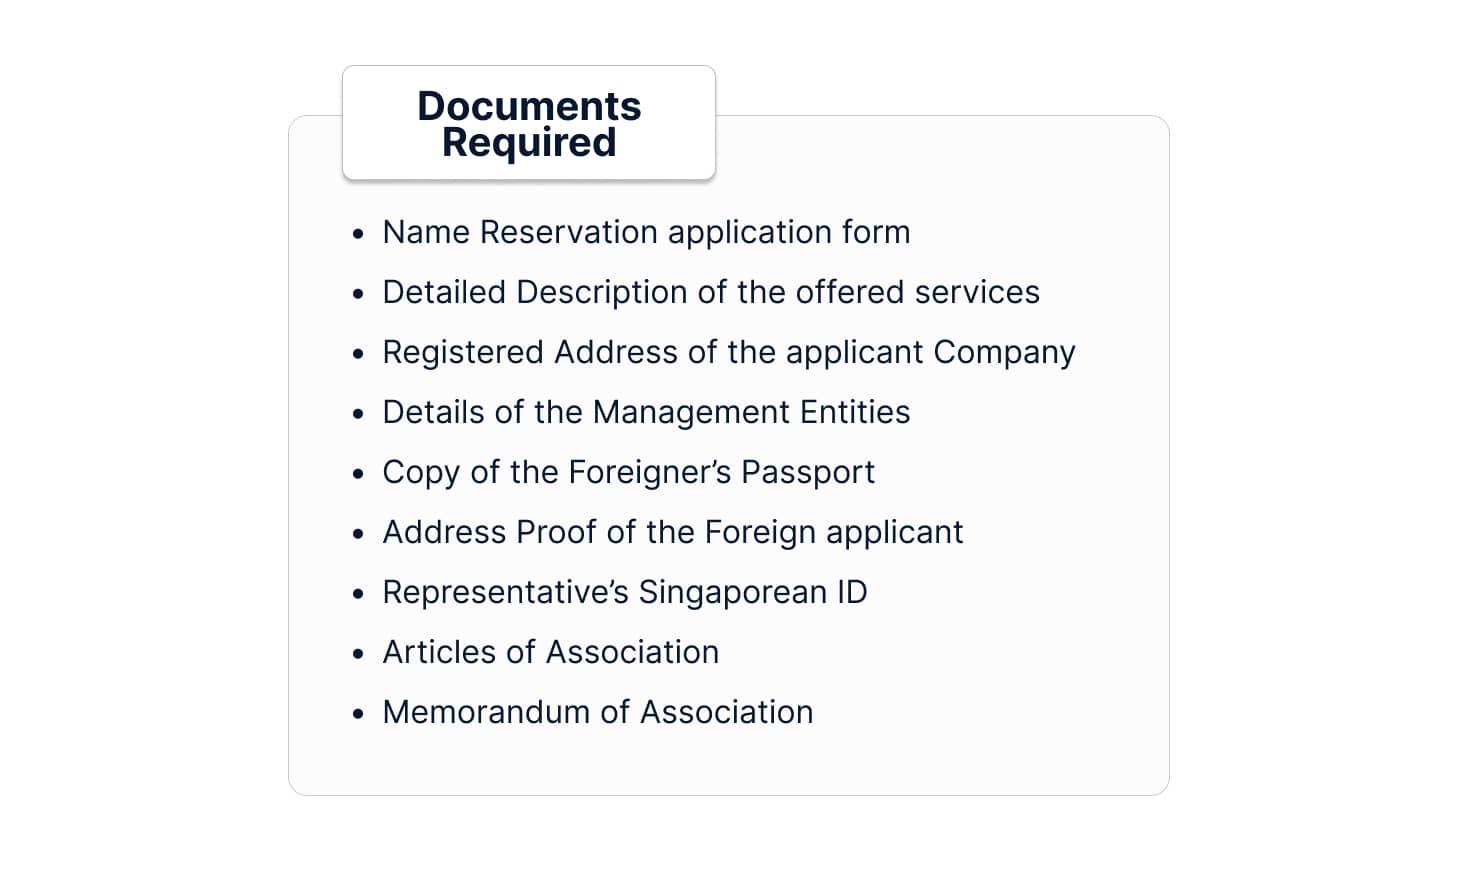 Documents required for Company Registration in Singapore